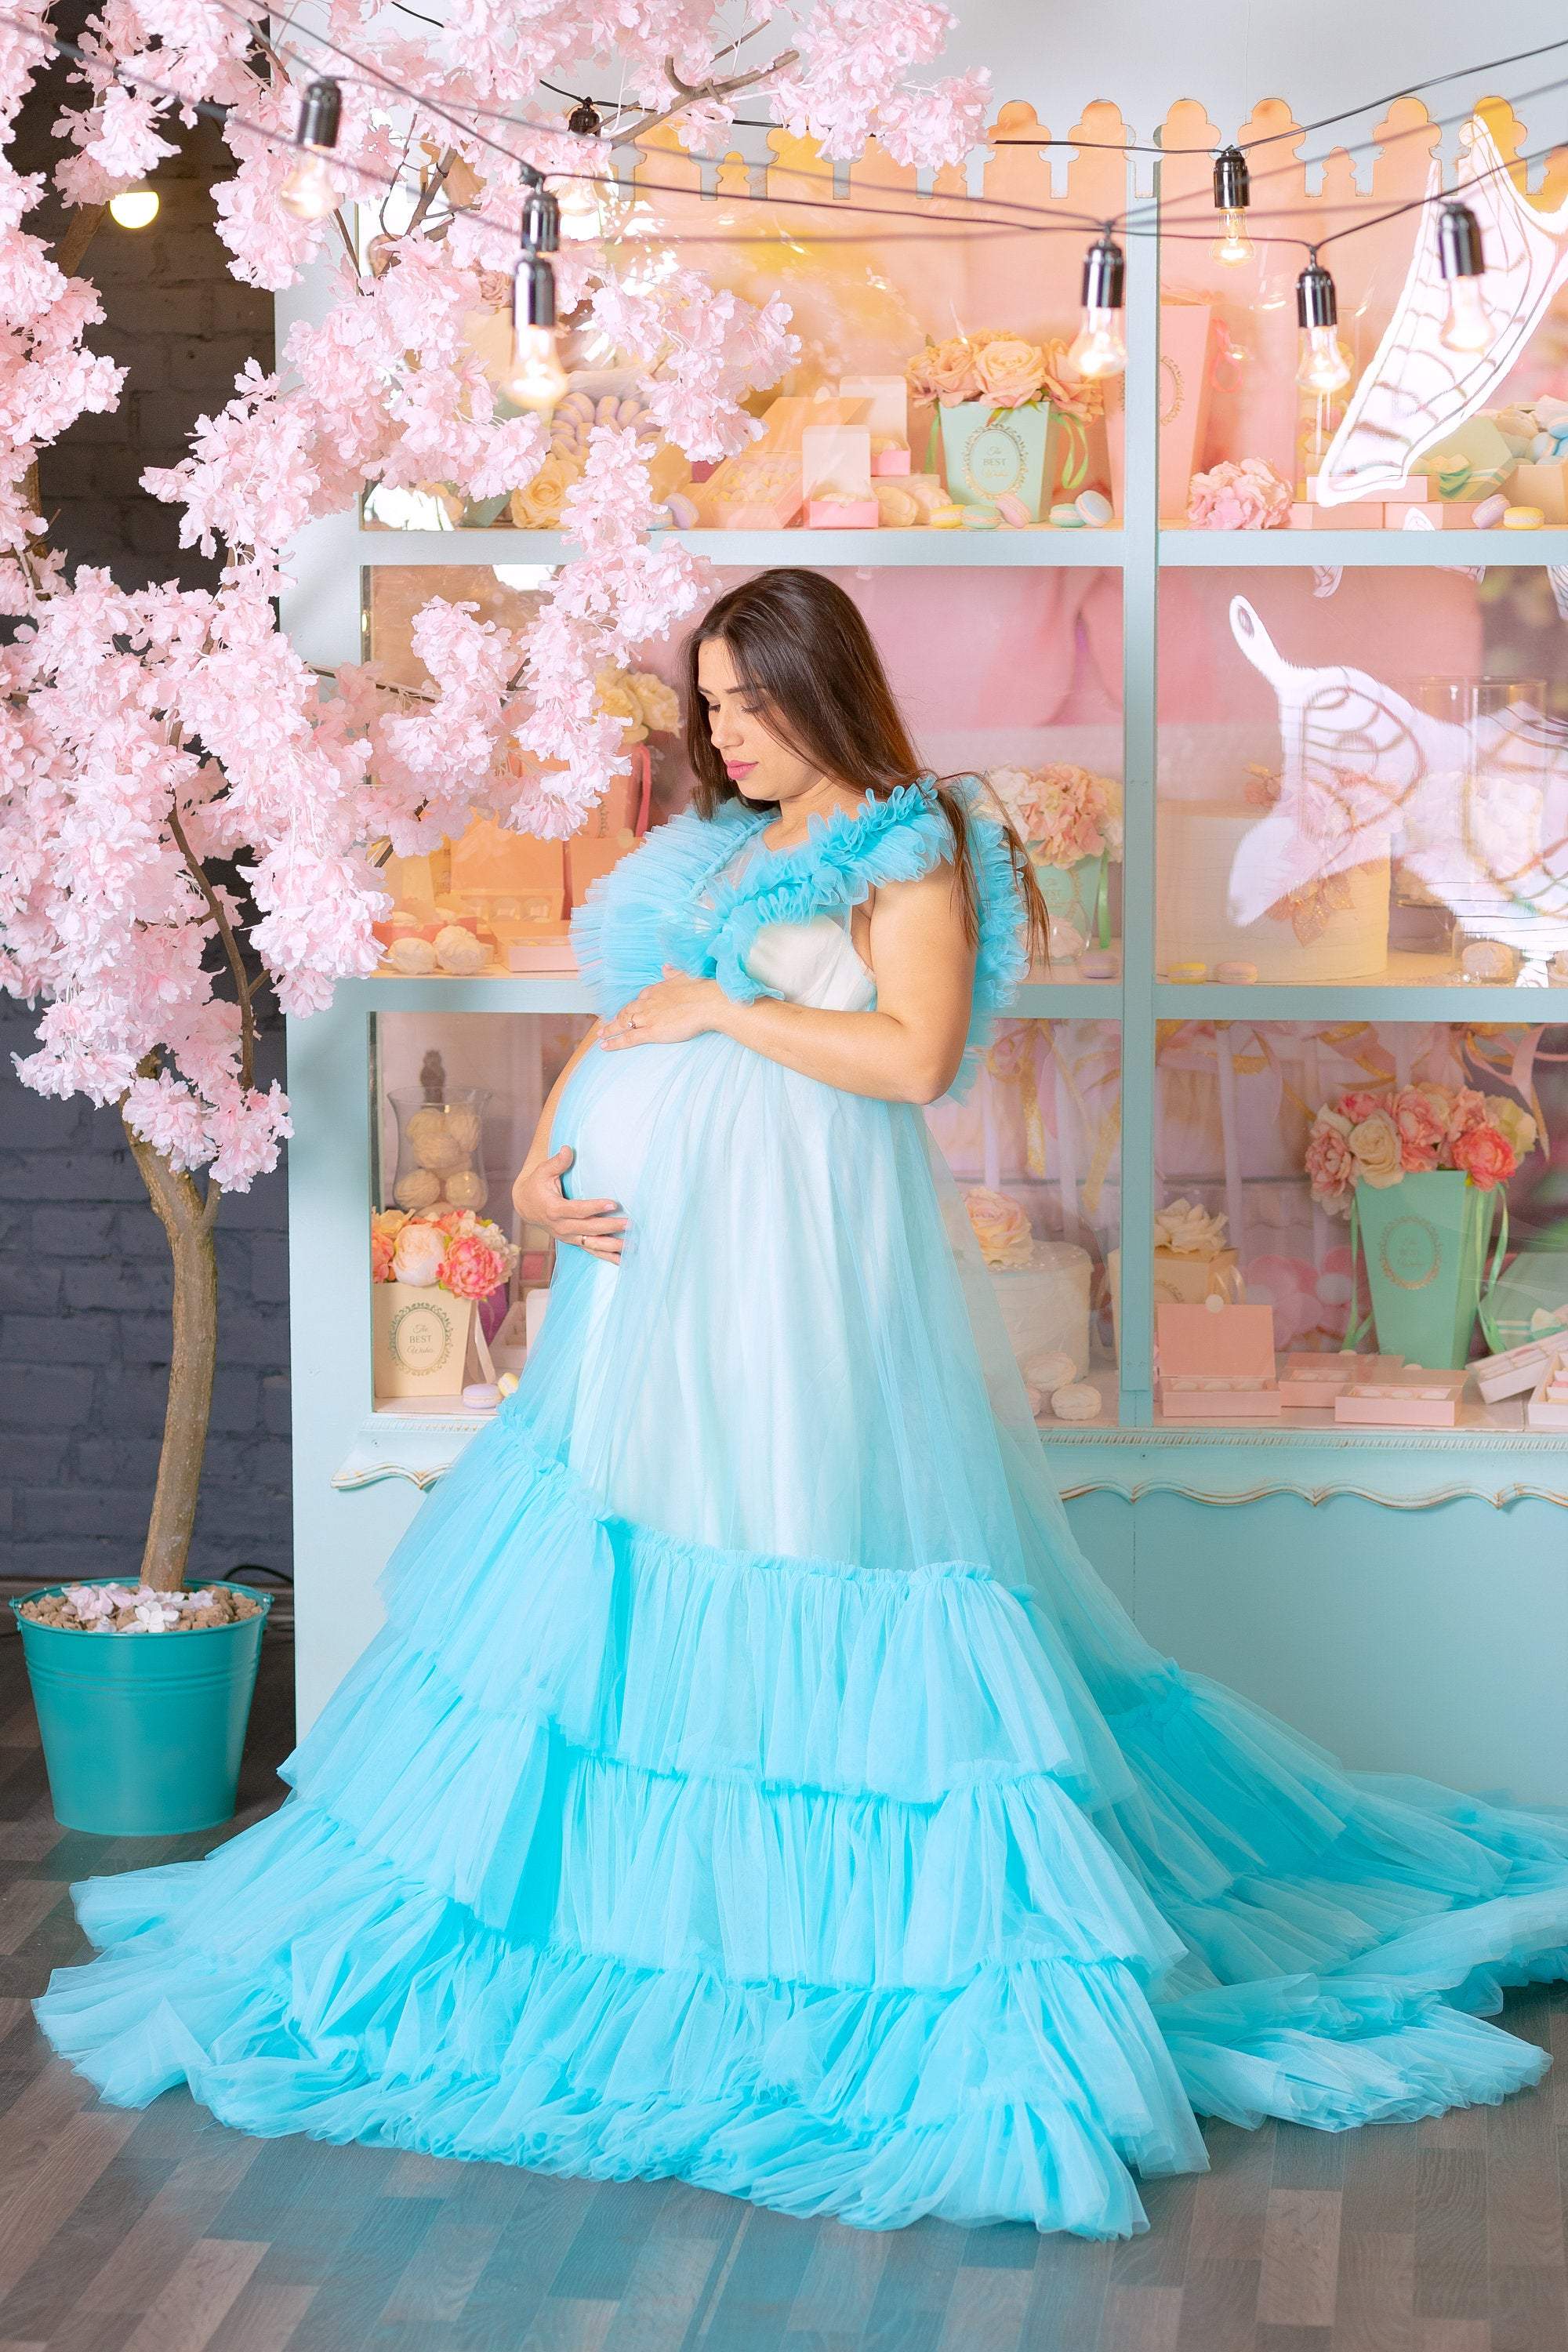 Best Maternity Dress for Photoshoots or Baby Showers - Straight A Style